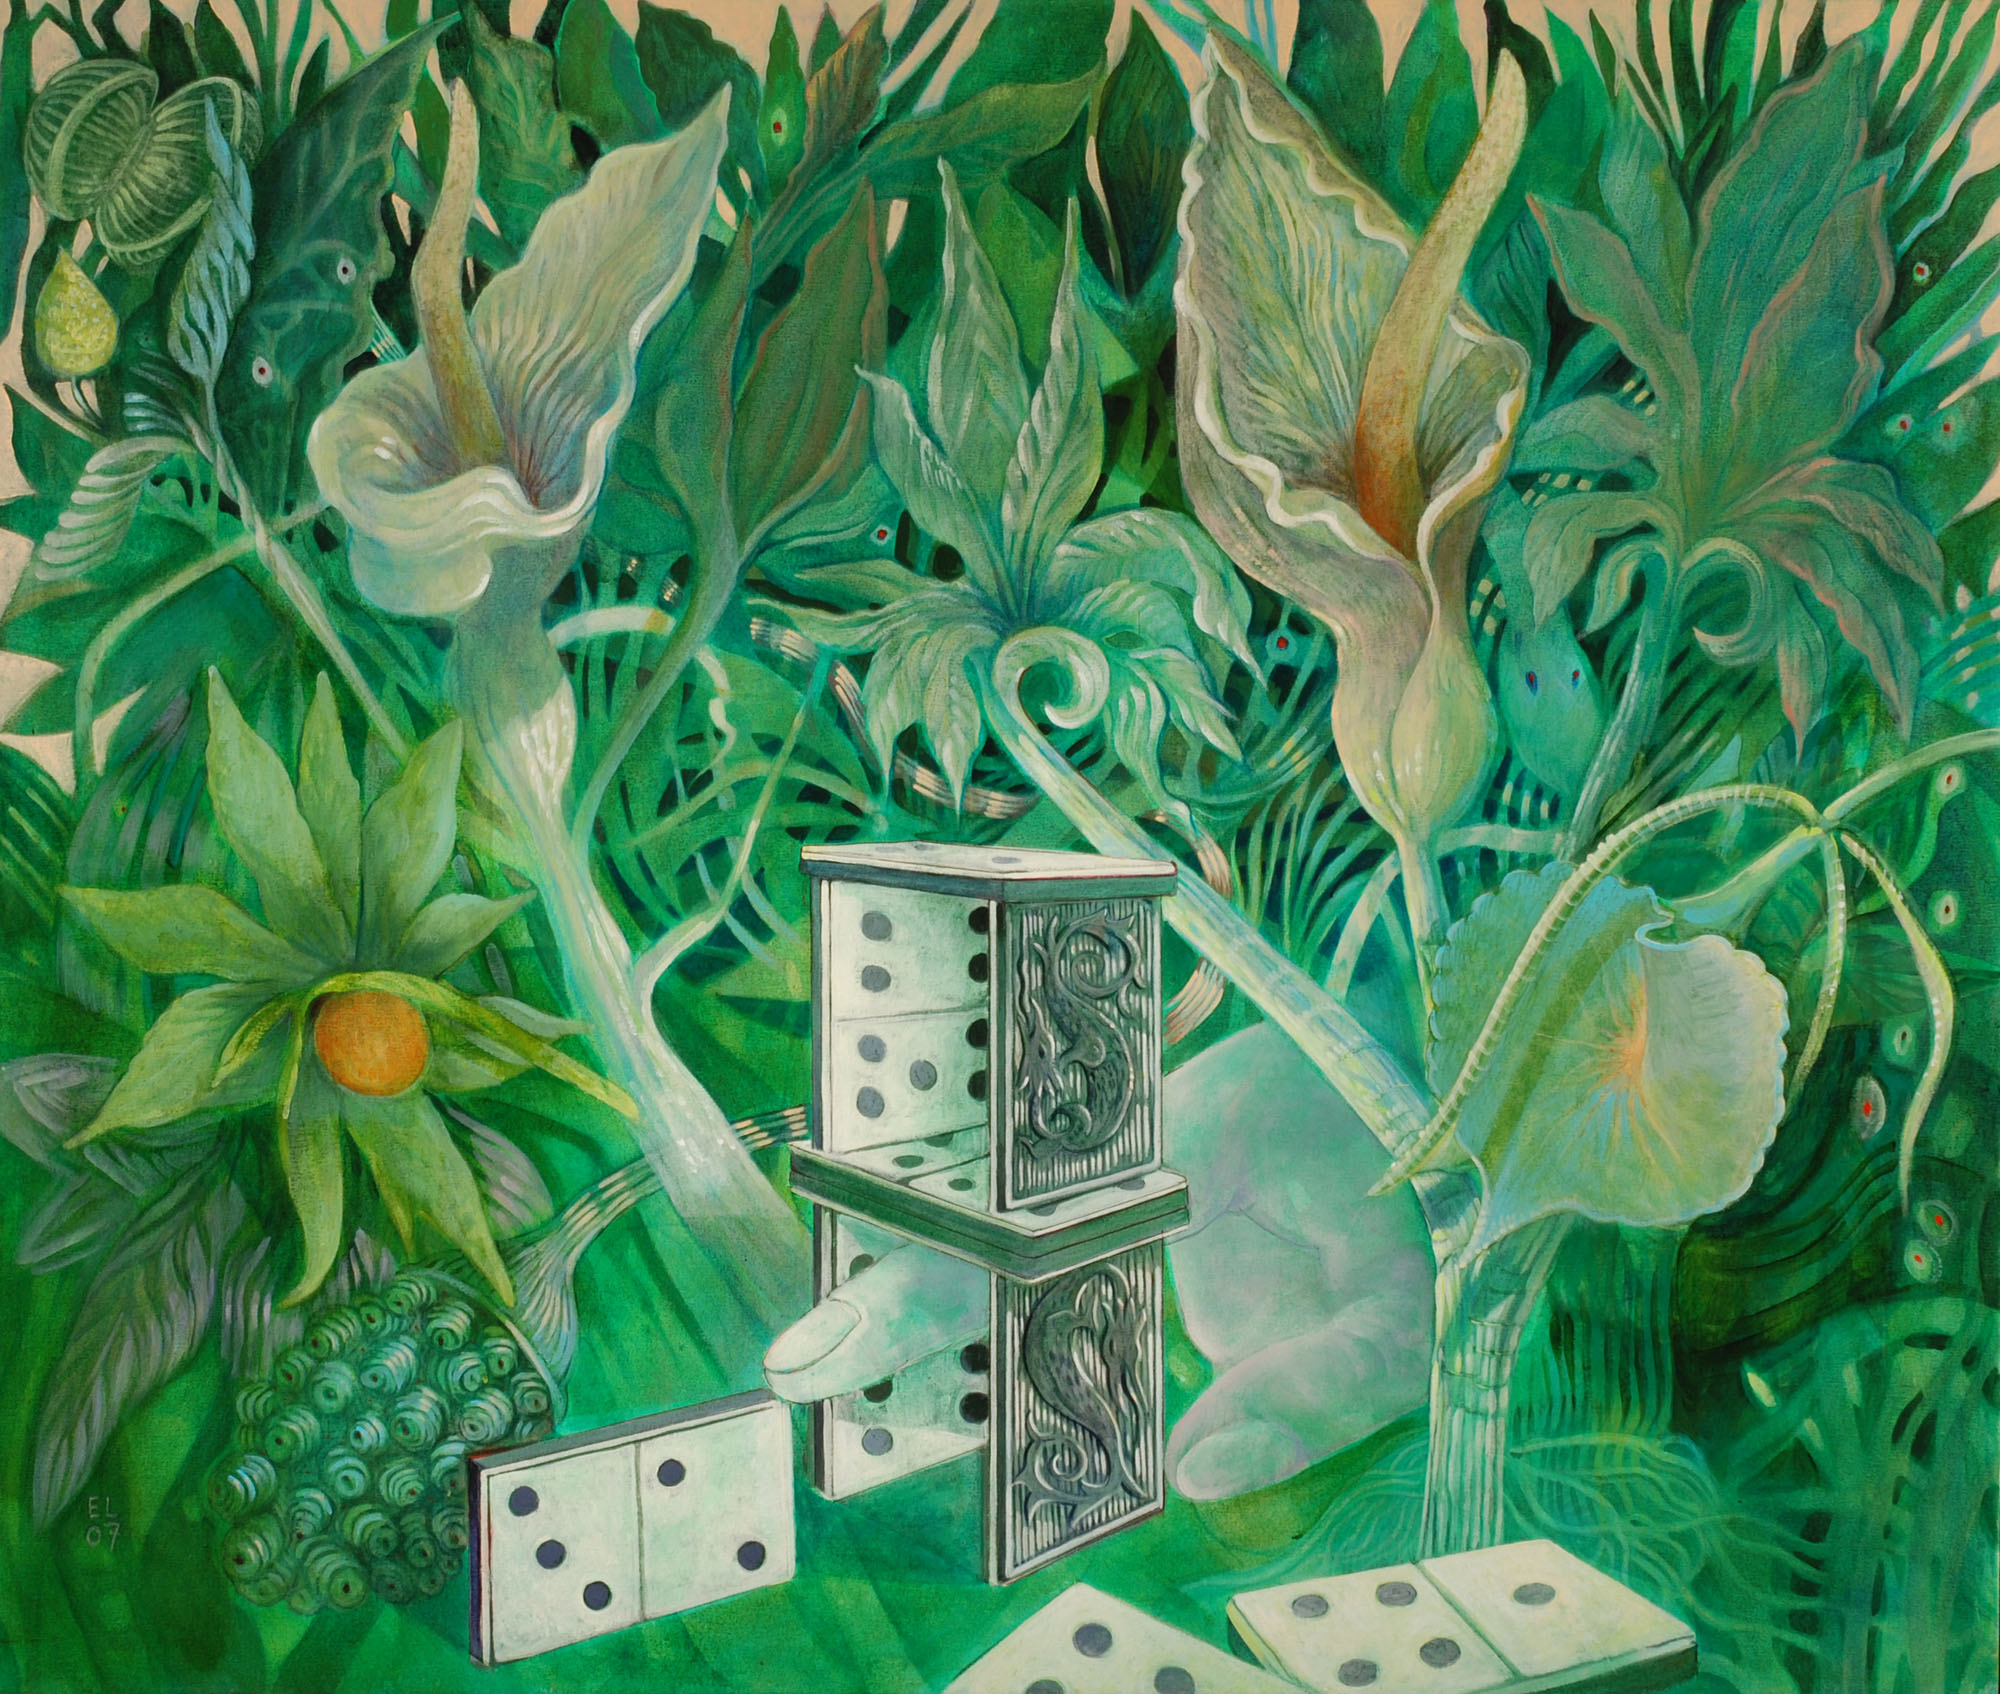 Ellen Lanyon, Dragons and Dominos, 1999–2007. Acrylic on canvas. Courtesy of the artist and Valerie Carberry Gallery, Chicago